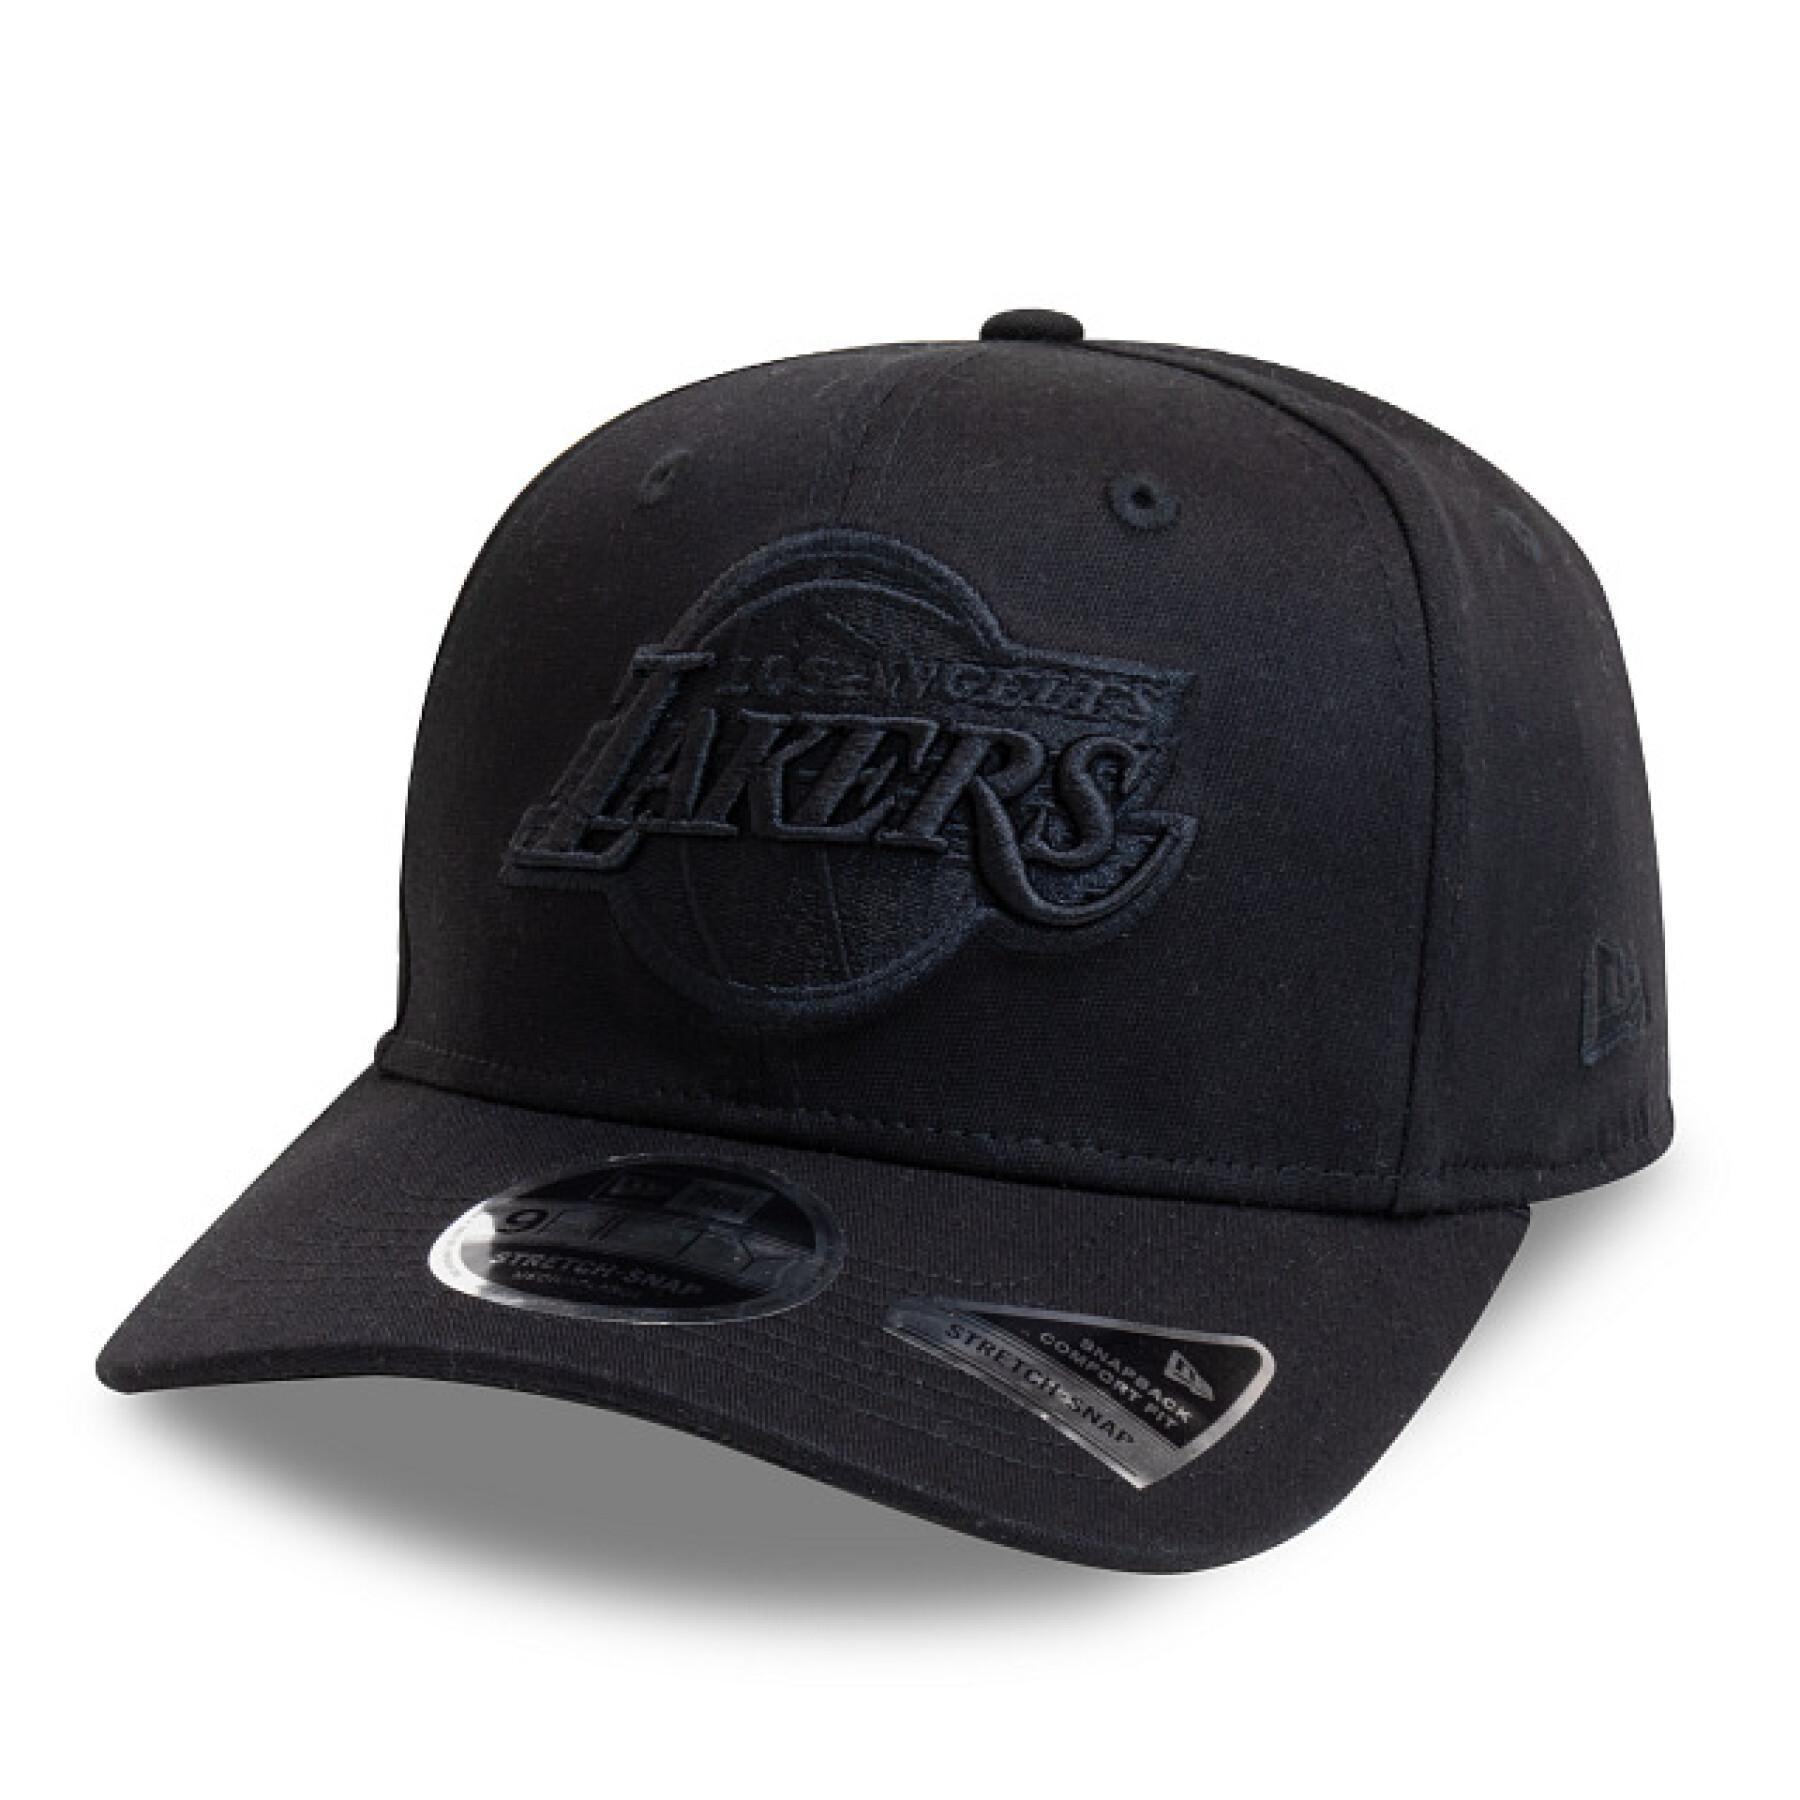 Gorra Los Angeles Lakers 9FIFTY